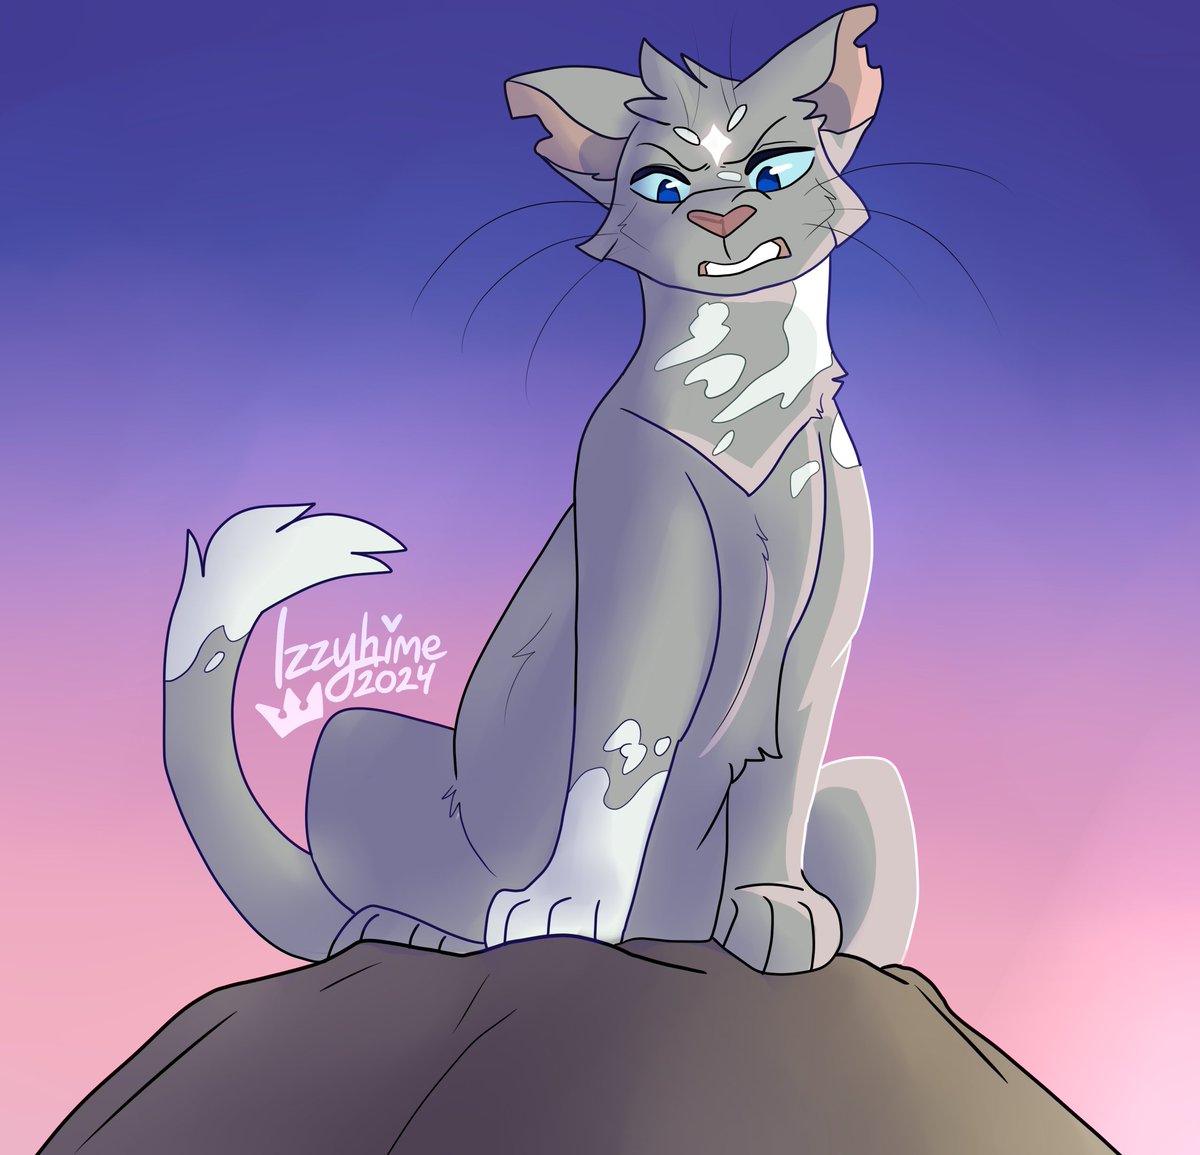 The founder of Skyclan, also known as Clear Sky the absolute worst #weeklywc #warriorcats @Fourtrees_WC #FanArtFriday